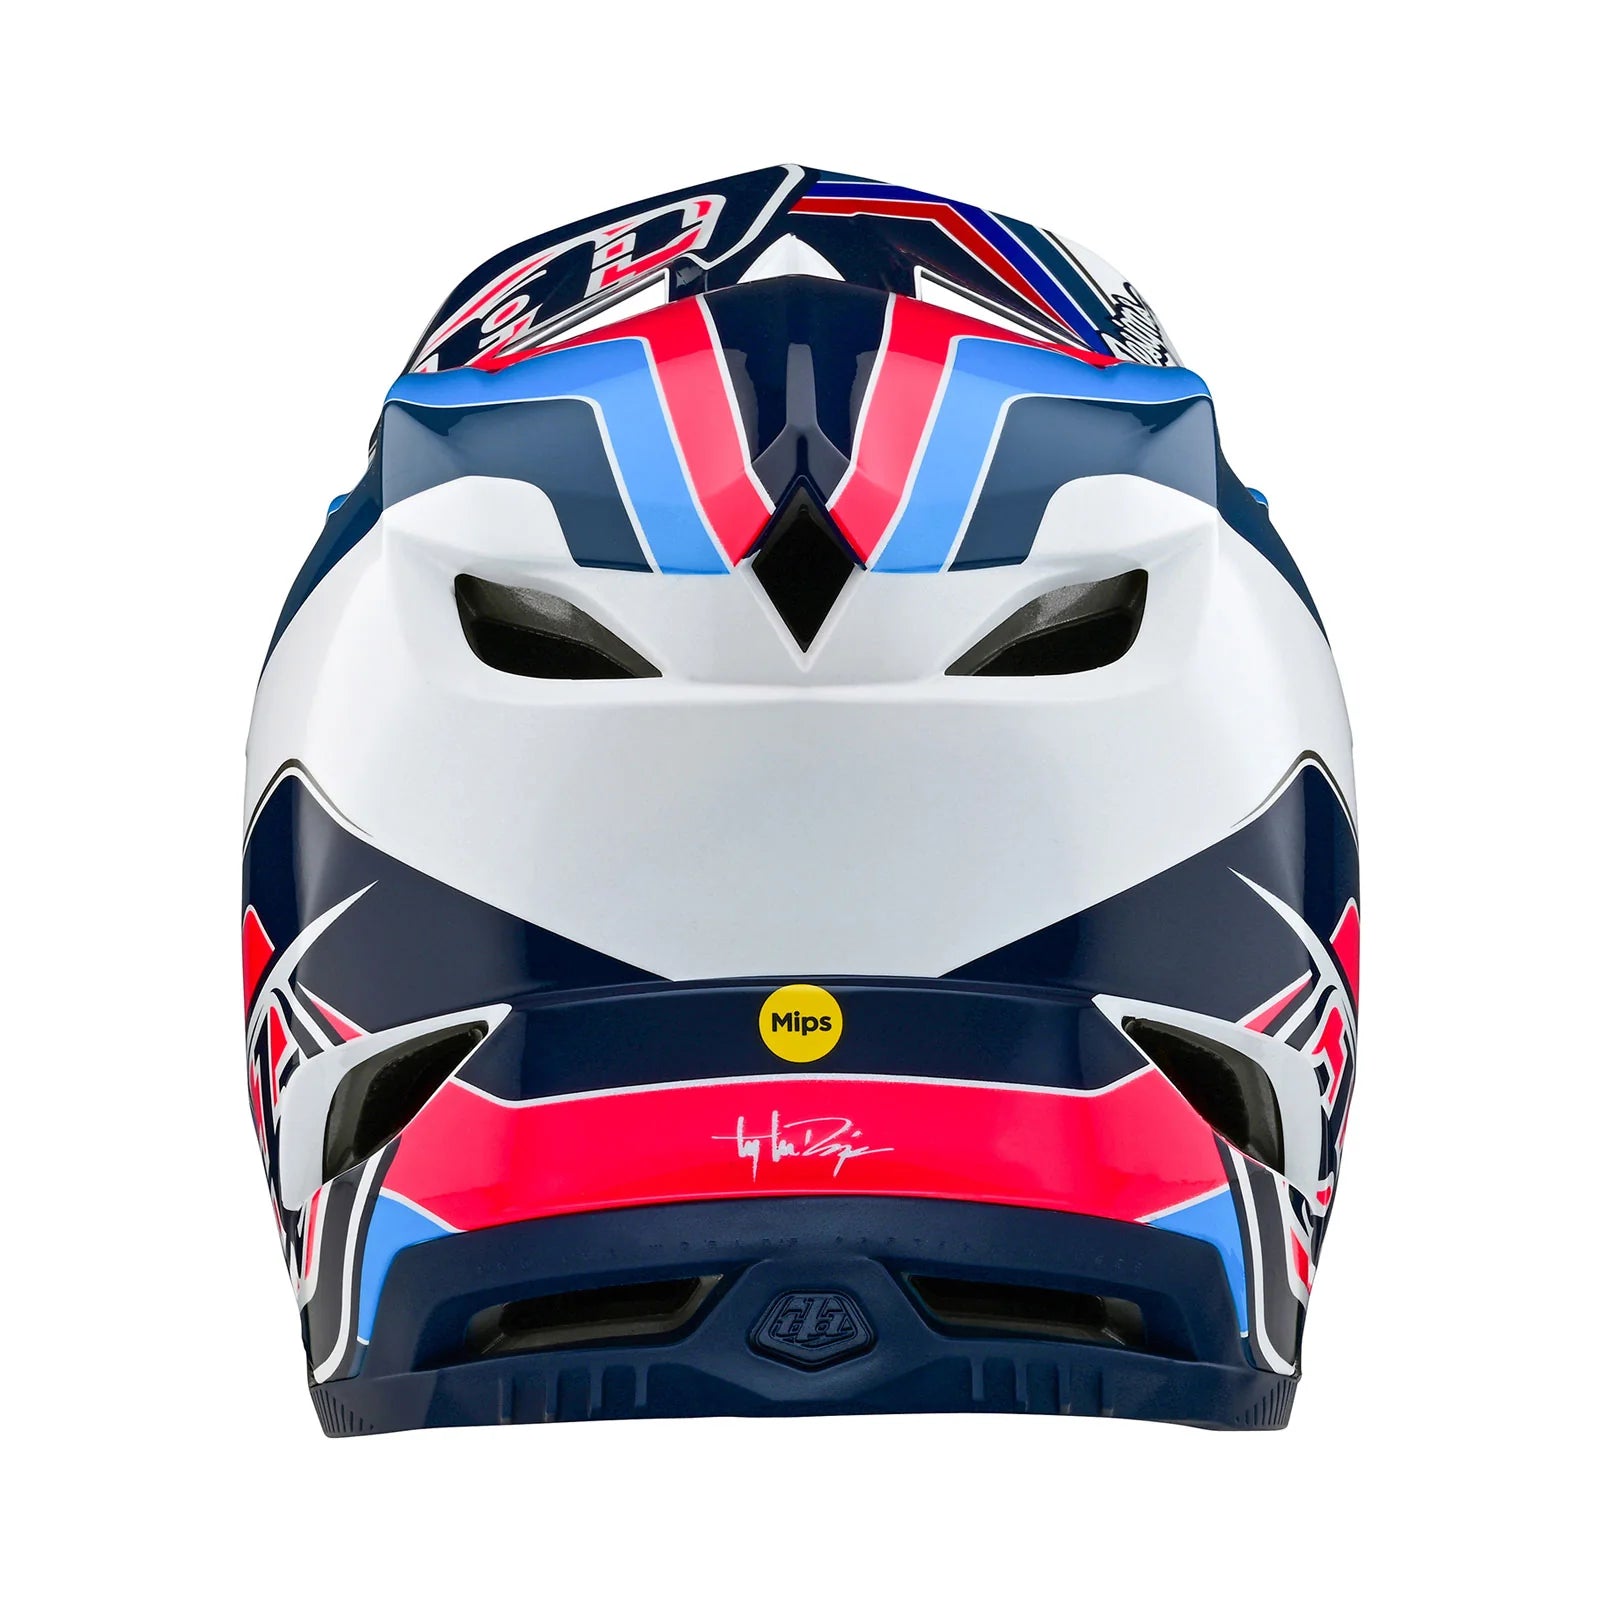 A safety helmet with a red, white, and blue design by TLD D4 AS Polyacrylite Helmet W/MIPS Block Blue / White.